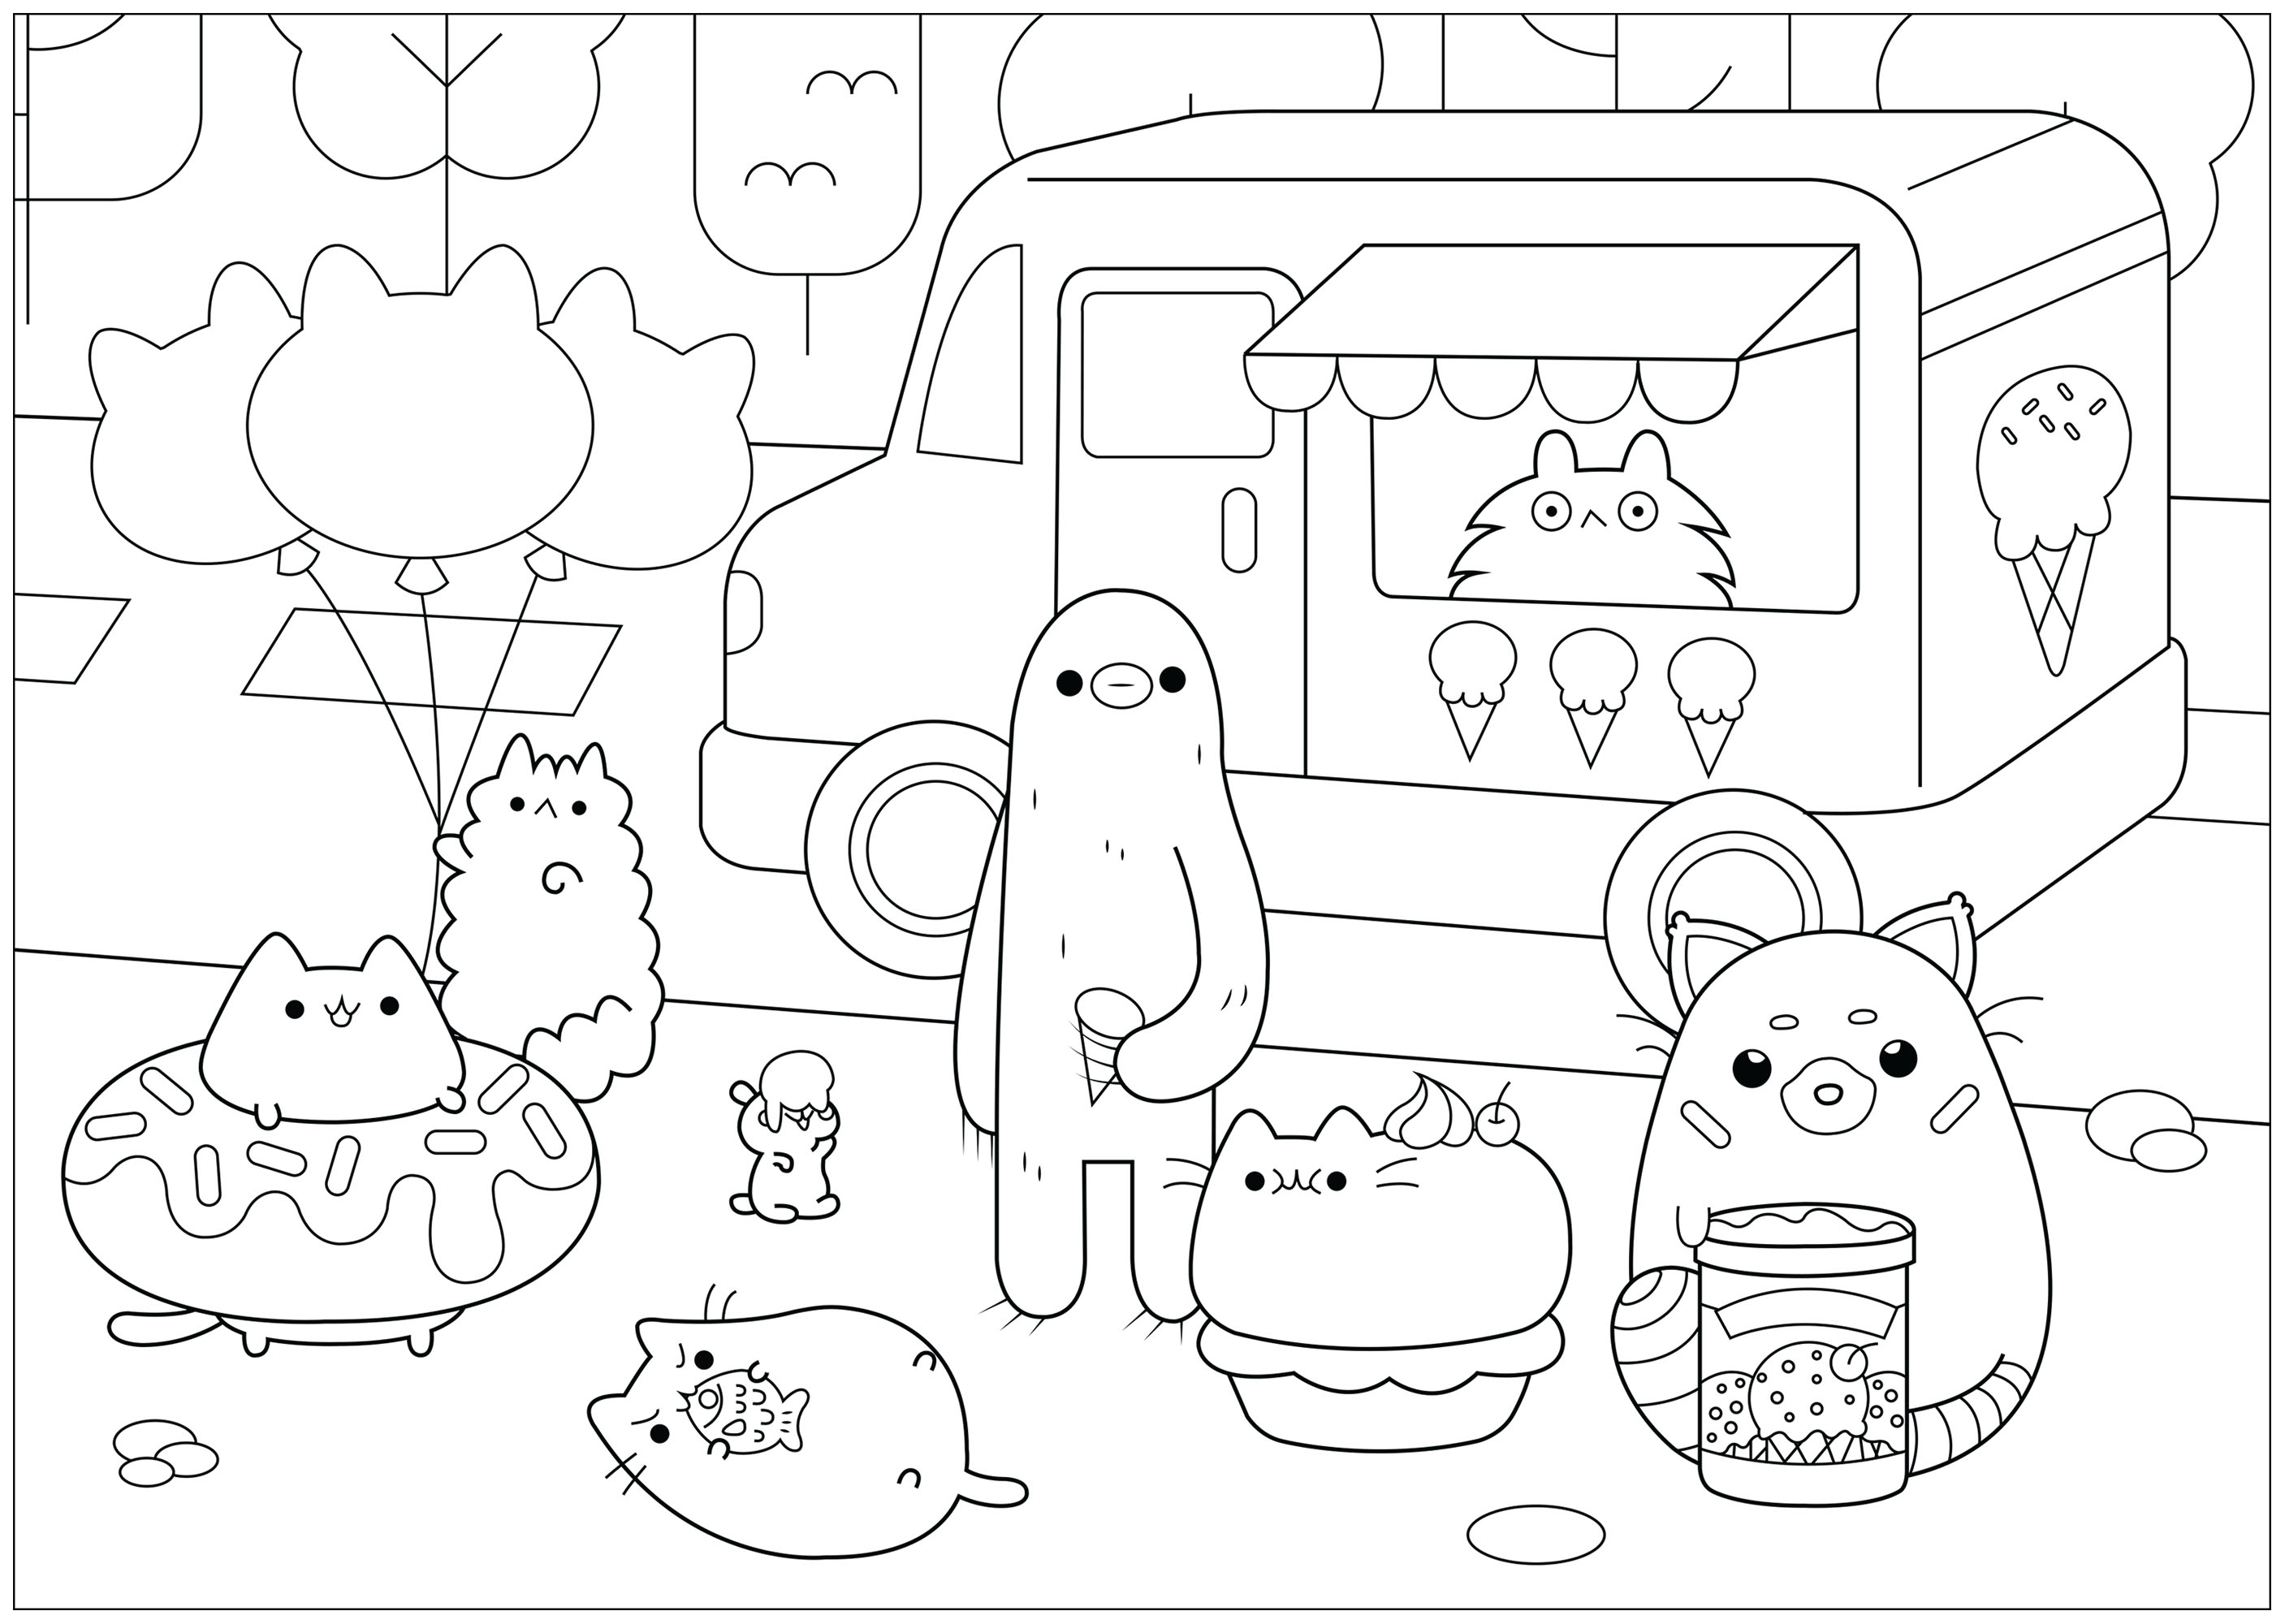 Download Pusheen - Coloring Pages for Adults